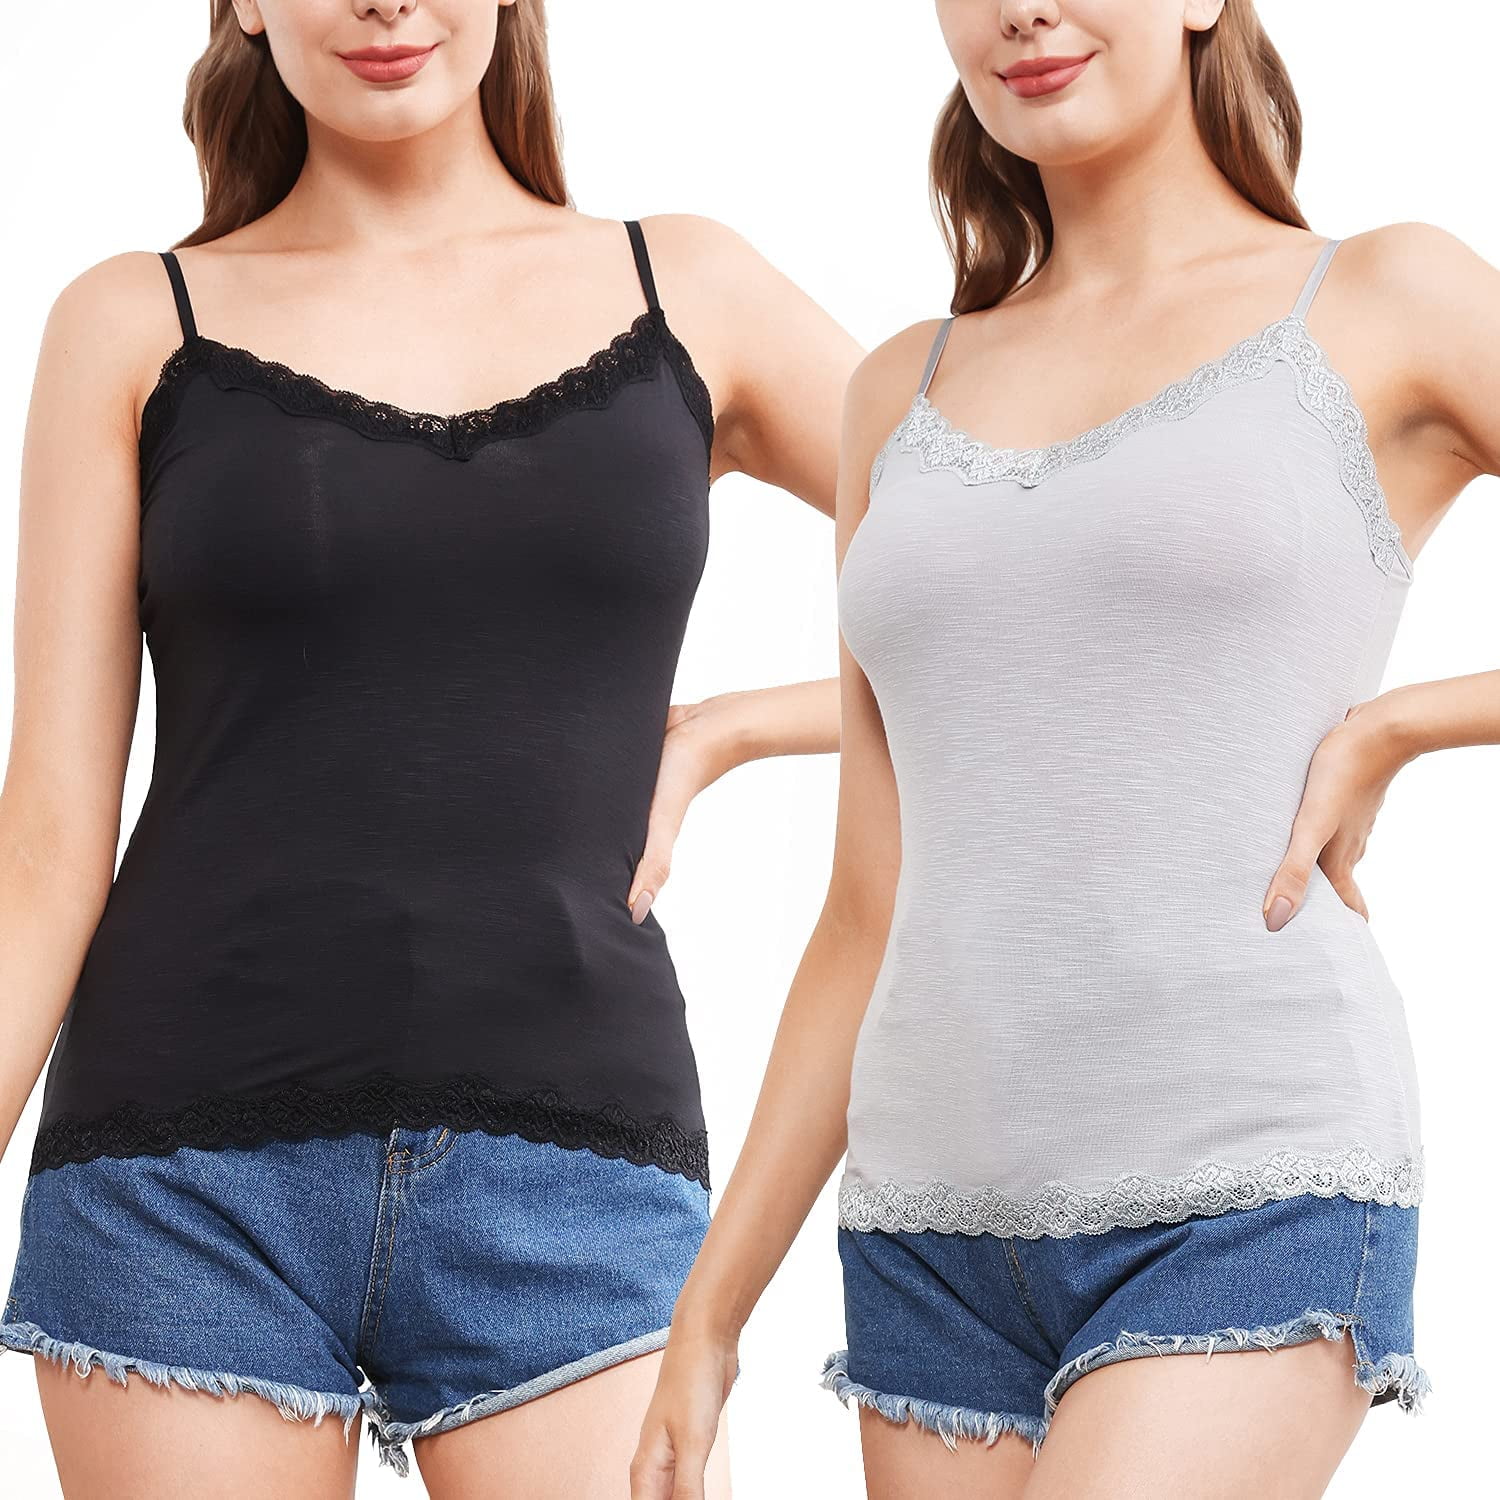 Women's Lace Camisole Adjustable Spaghetti Strap Tank Tops 2 Pack